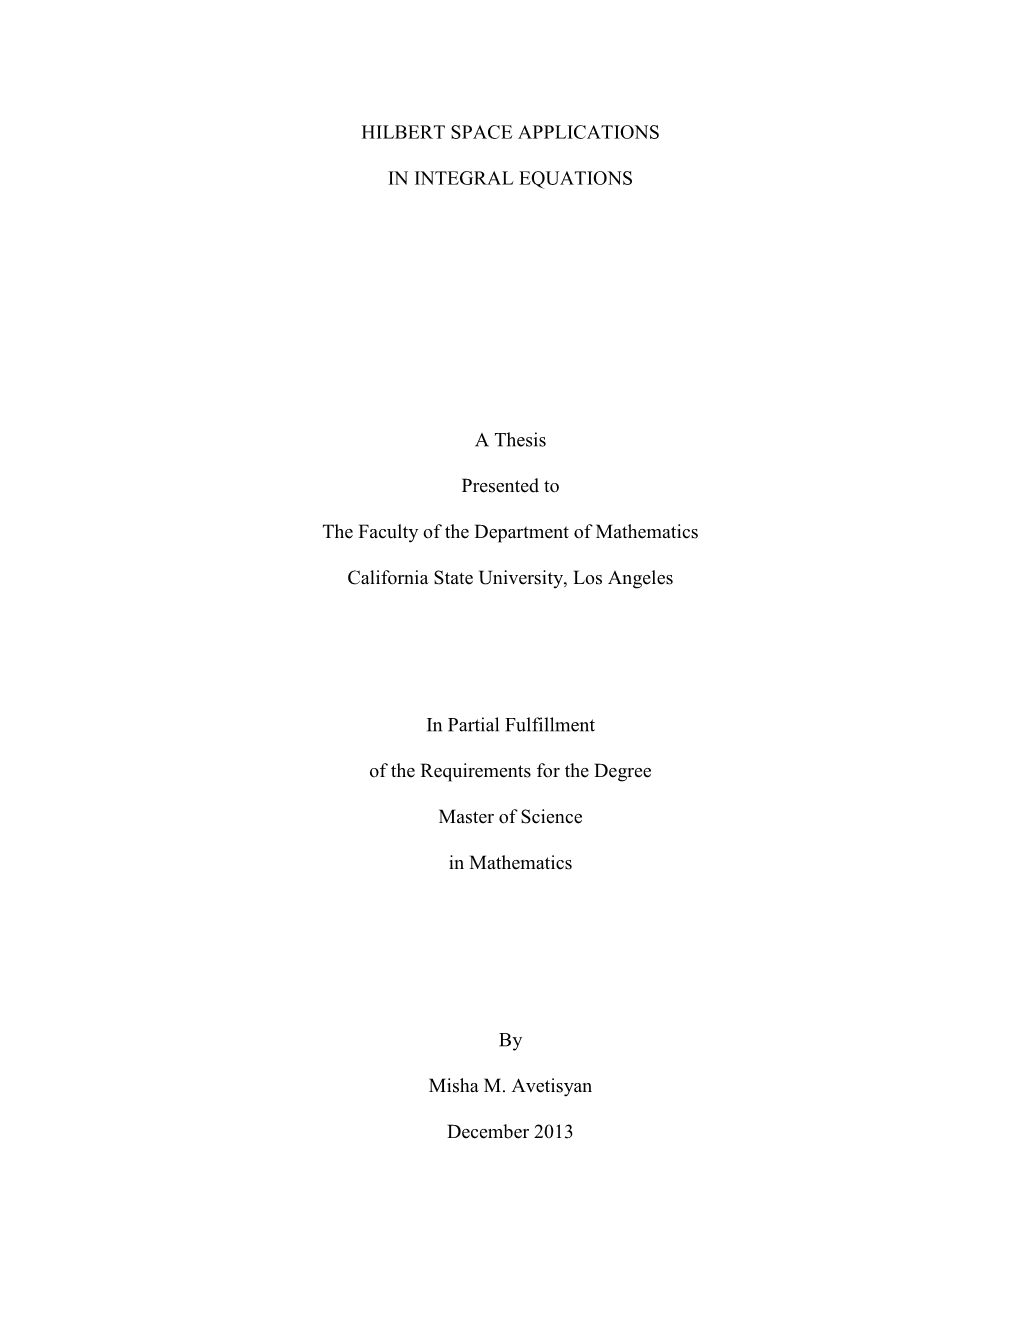 HILBERT SPACE APPLICATIONS in INTEGRAL EQUATIONS a Thesis